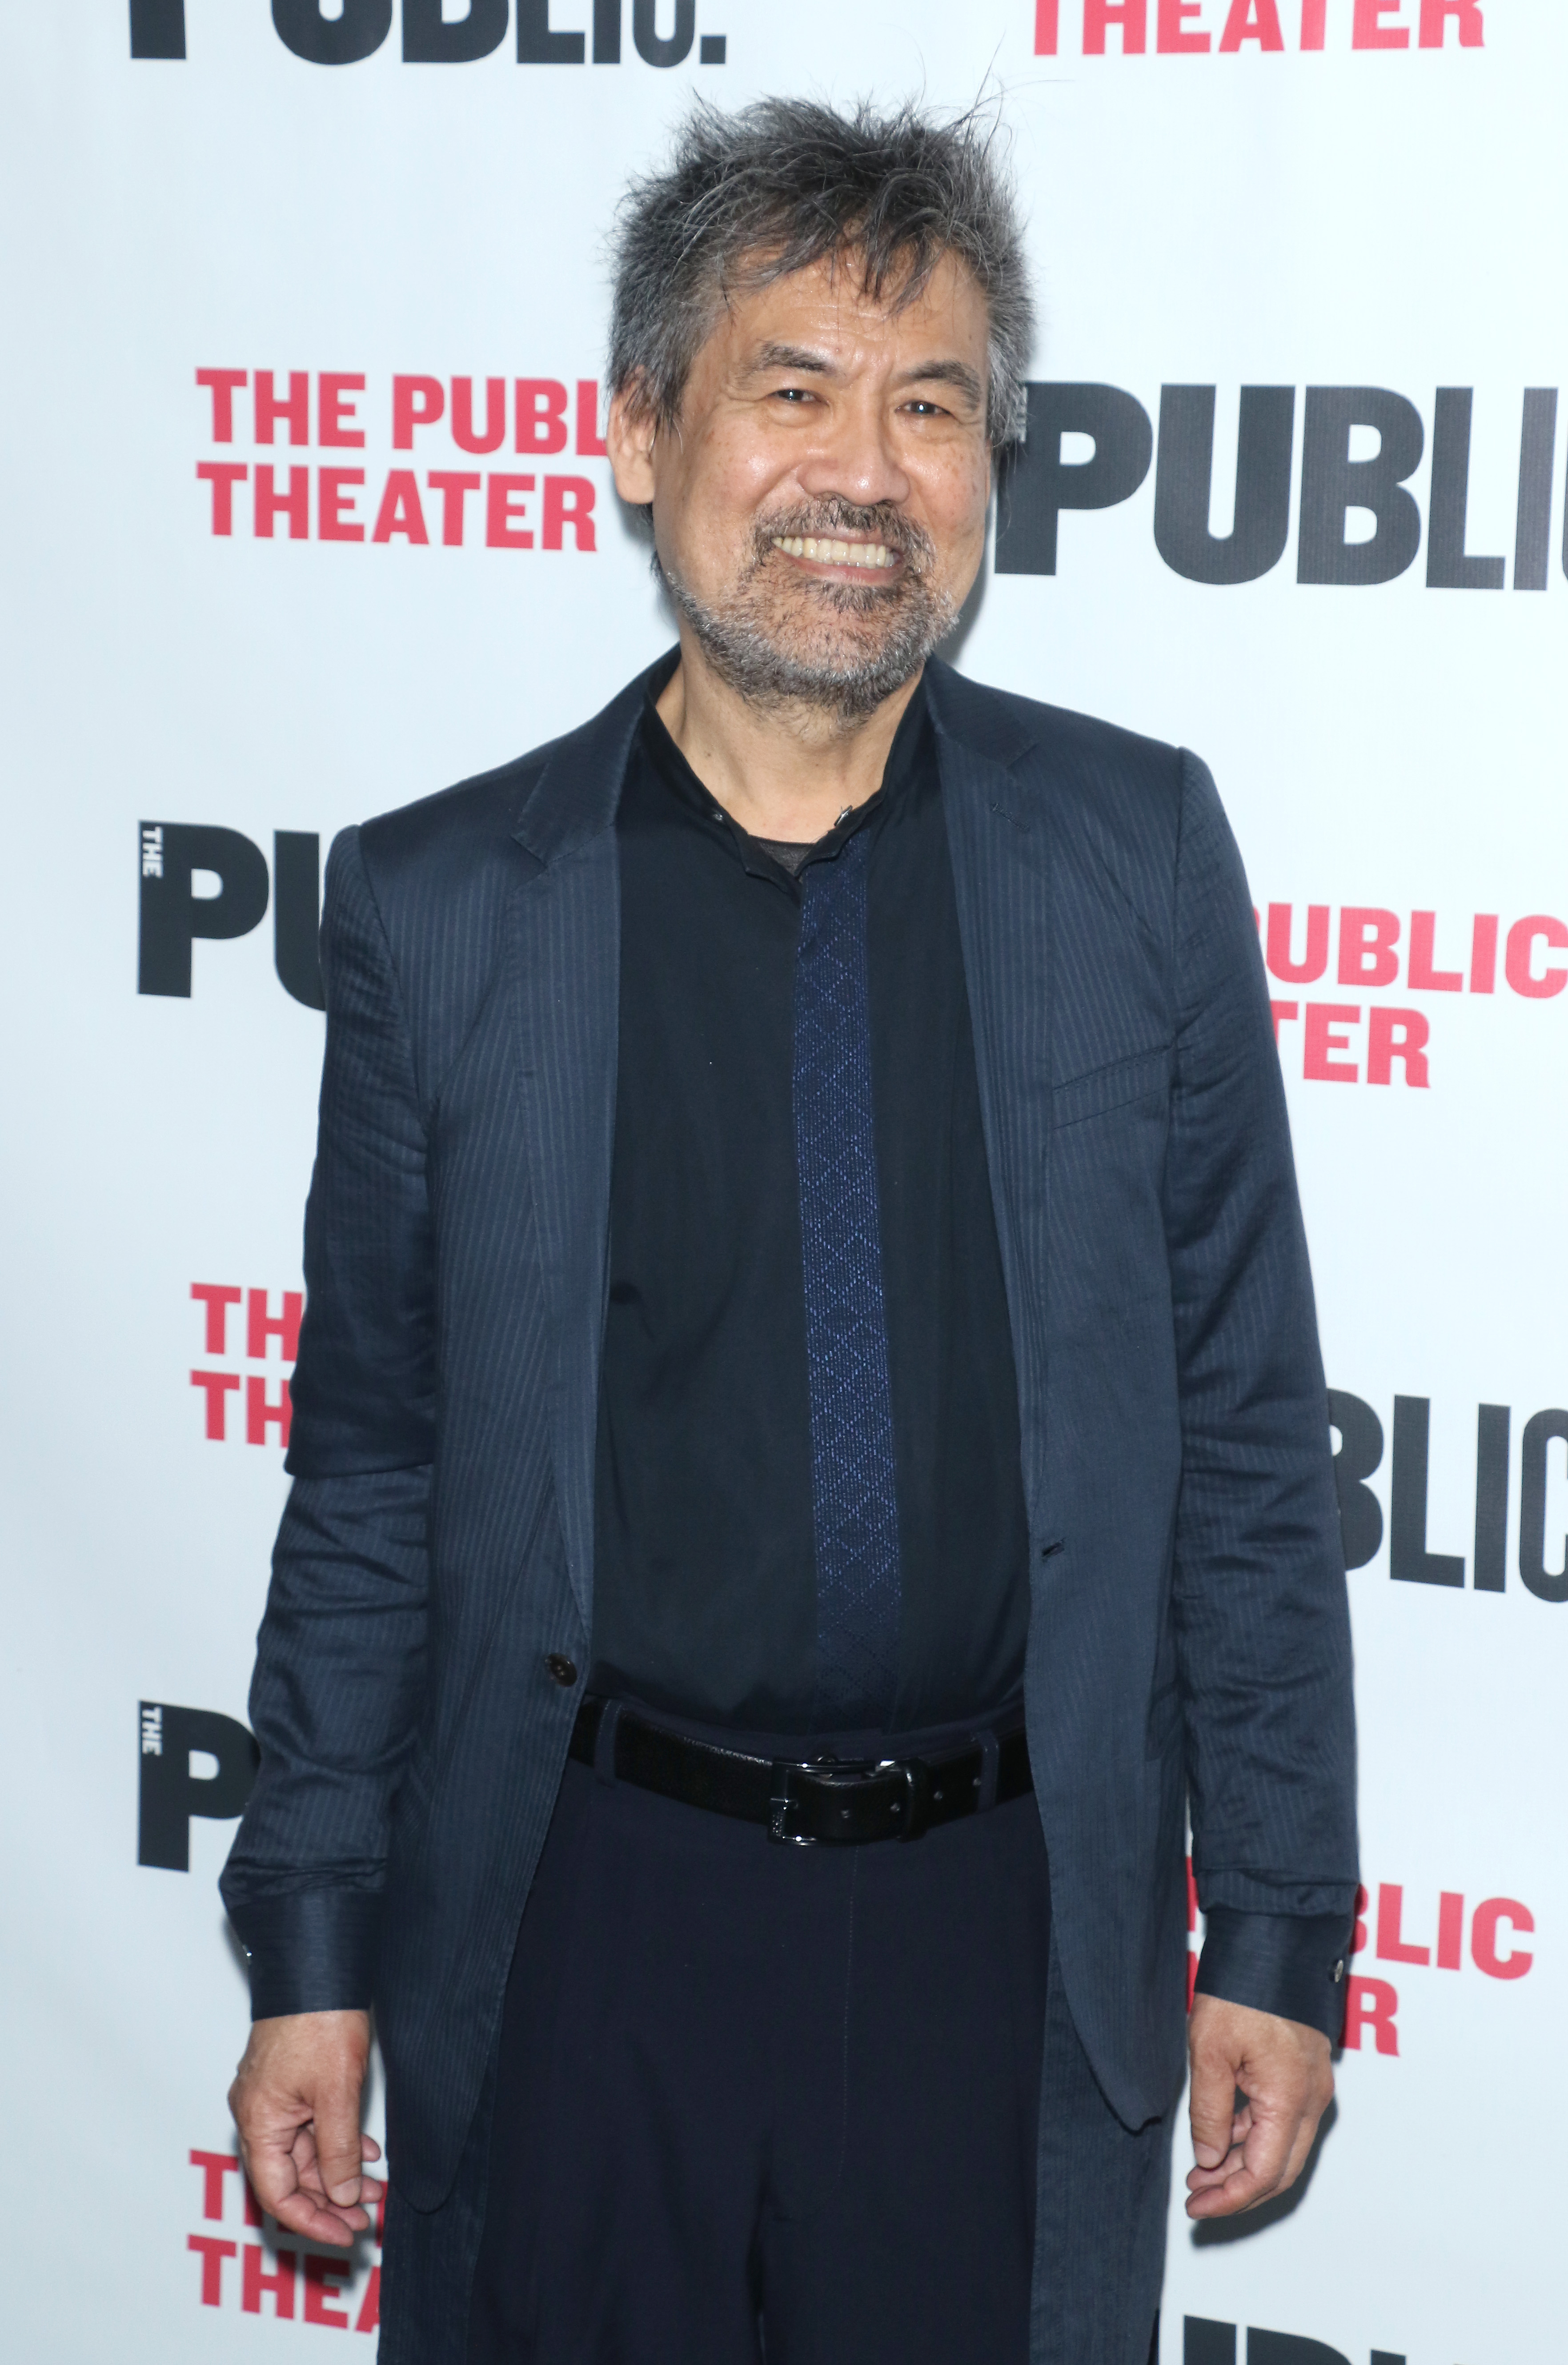 David Henry Hwang at the opening night of "Soft Power" at The Public Theater in 2019. (Jim Spellman&mdash;Getty Images)